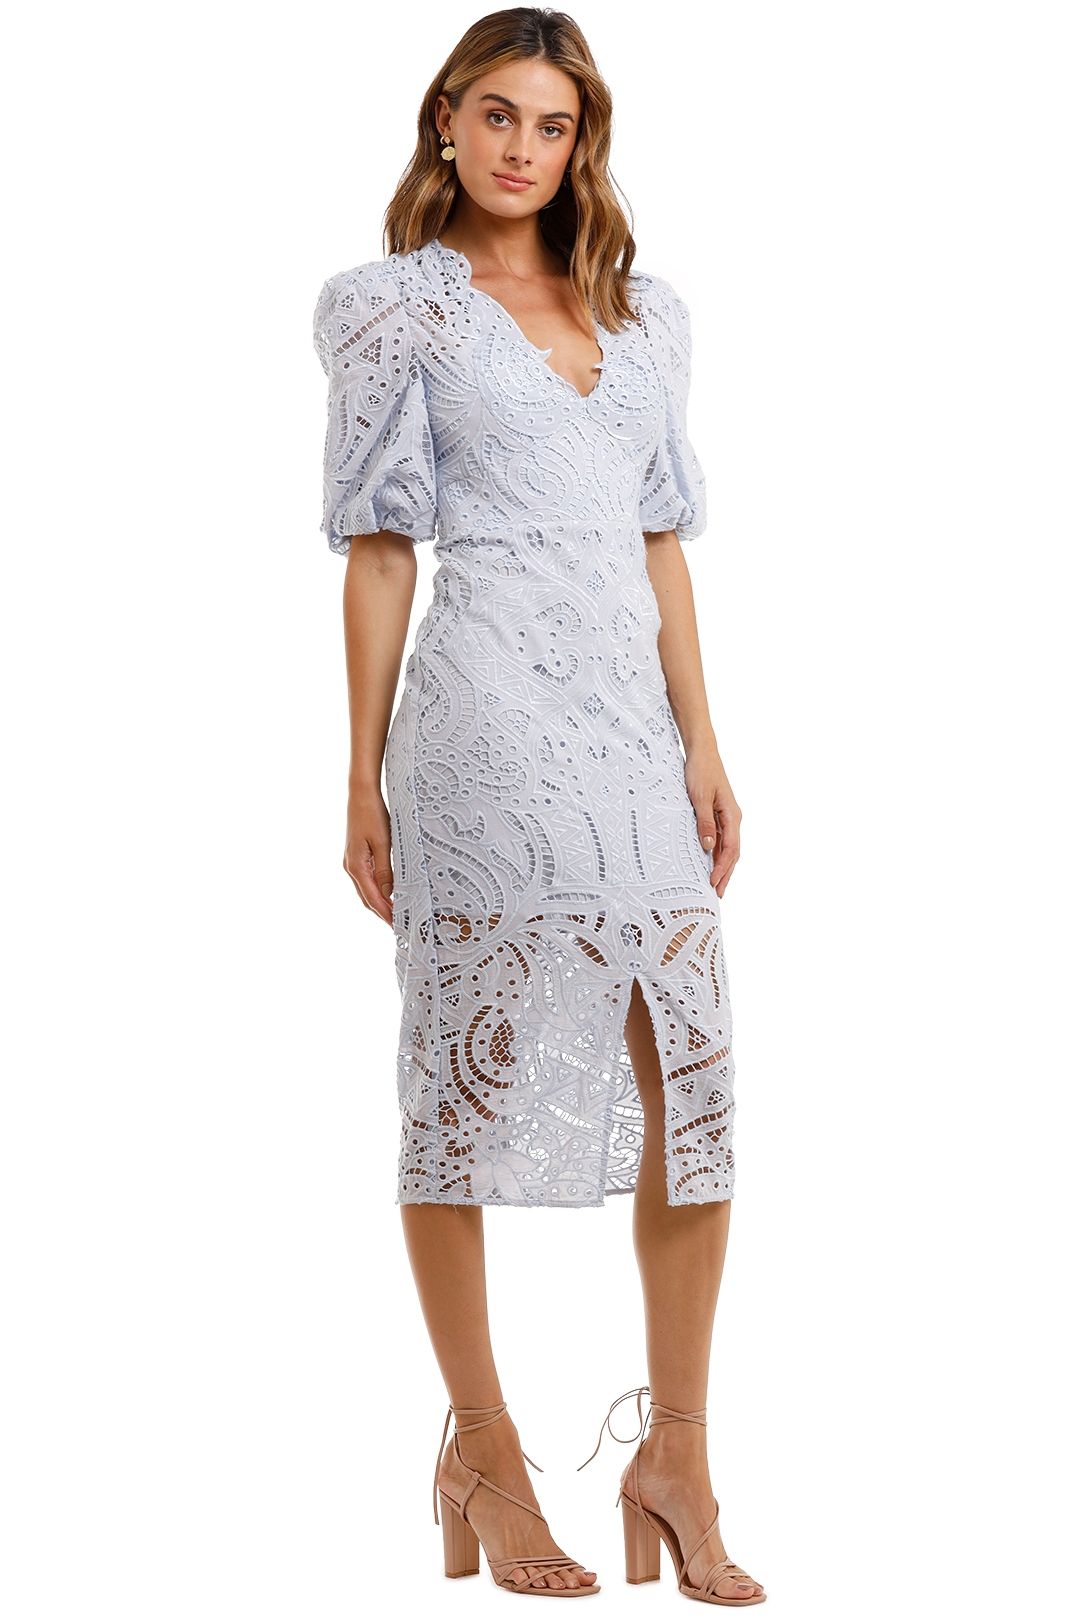 Thurley Persia Midi Dress Blue Heather embroidered